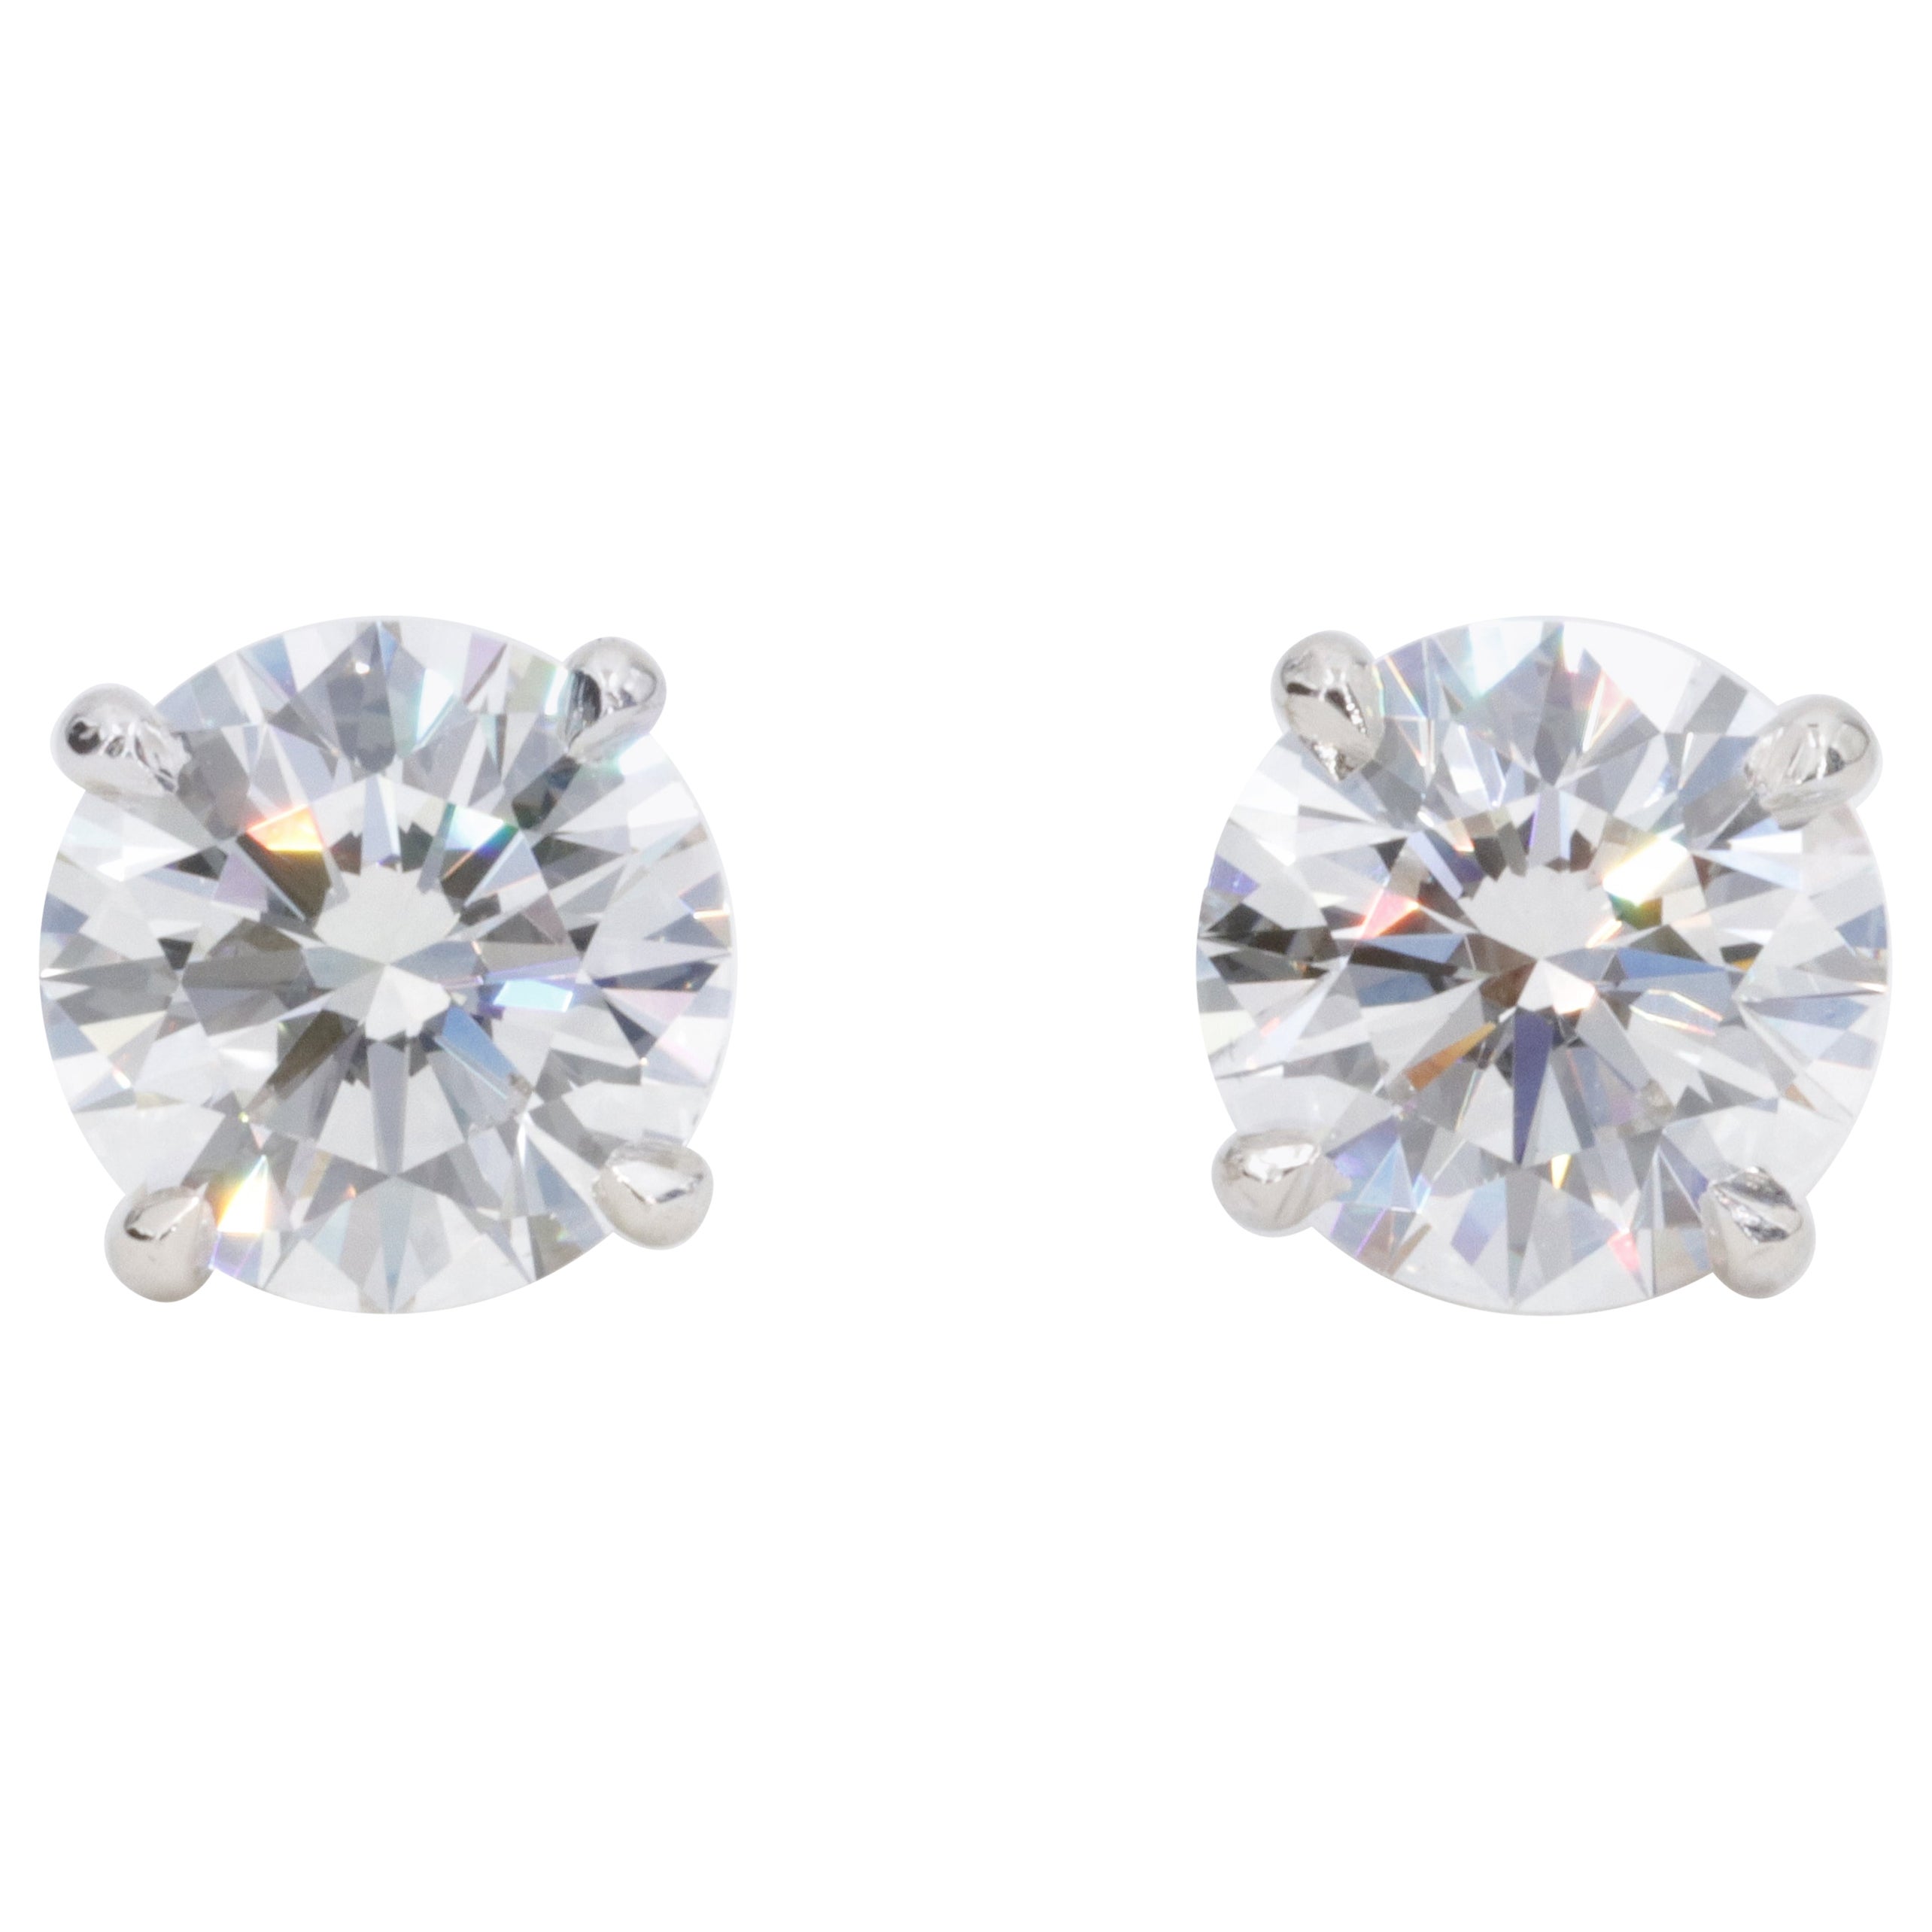 2.04 Carat GIA Diamond Stud Earrings Fine Quality in White Gold 4 Prong Settings For Sale